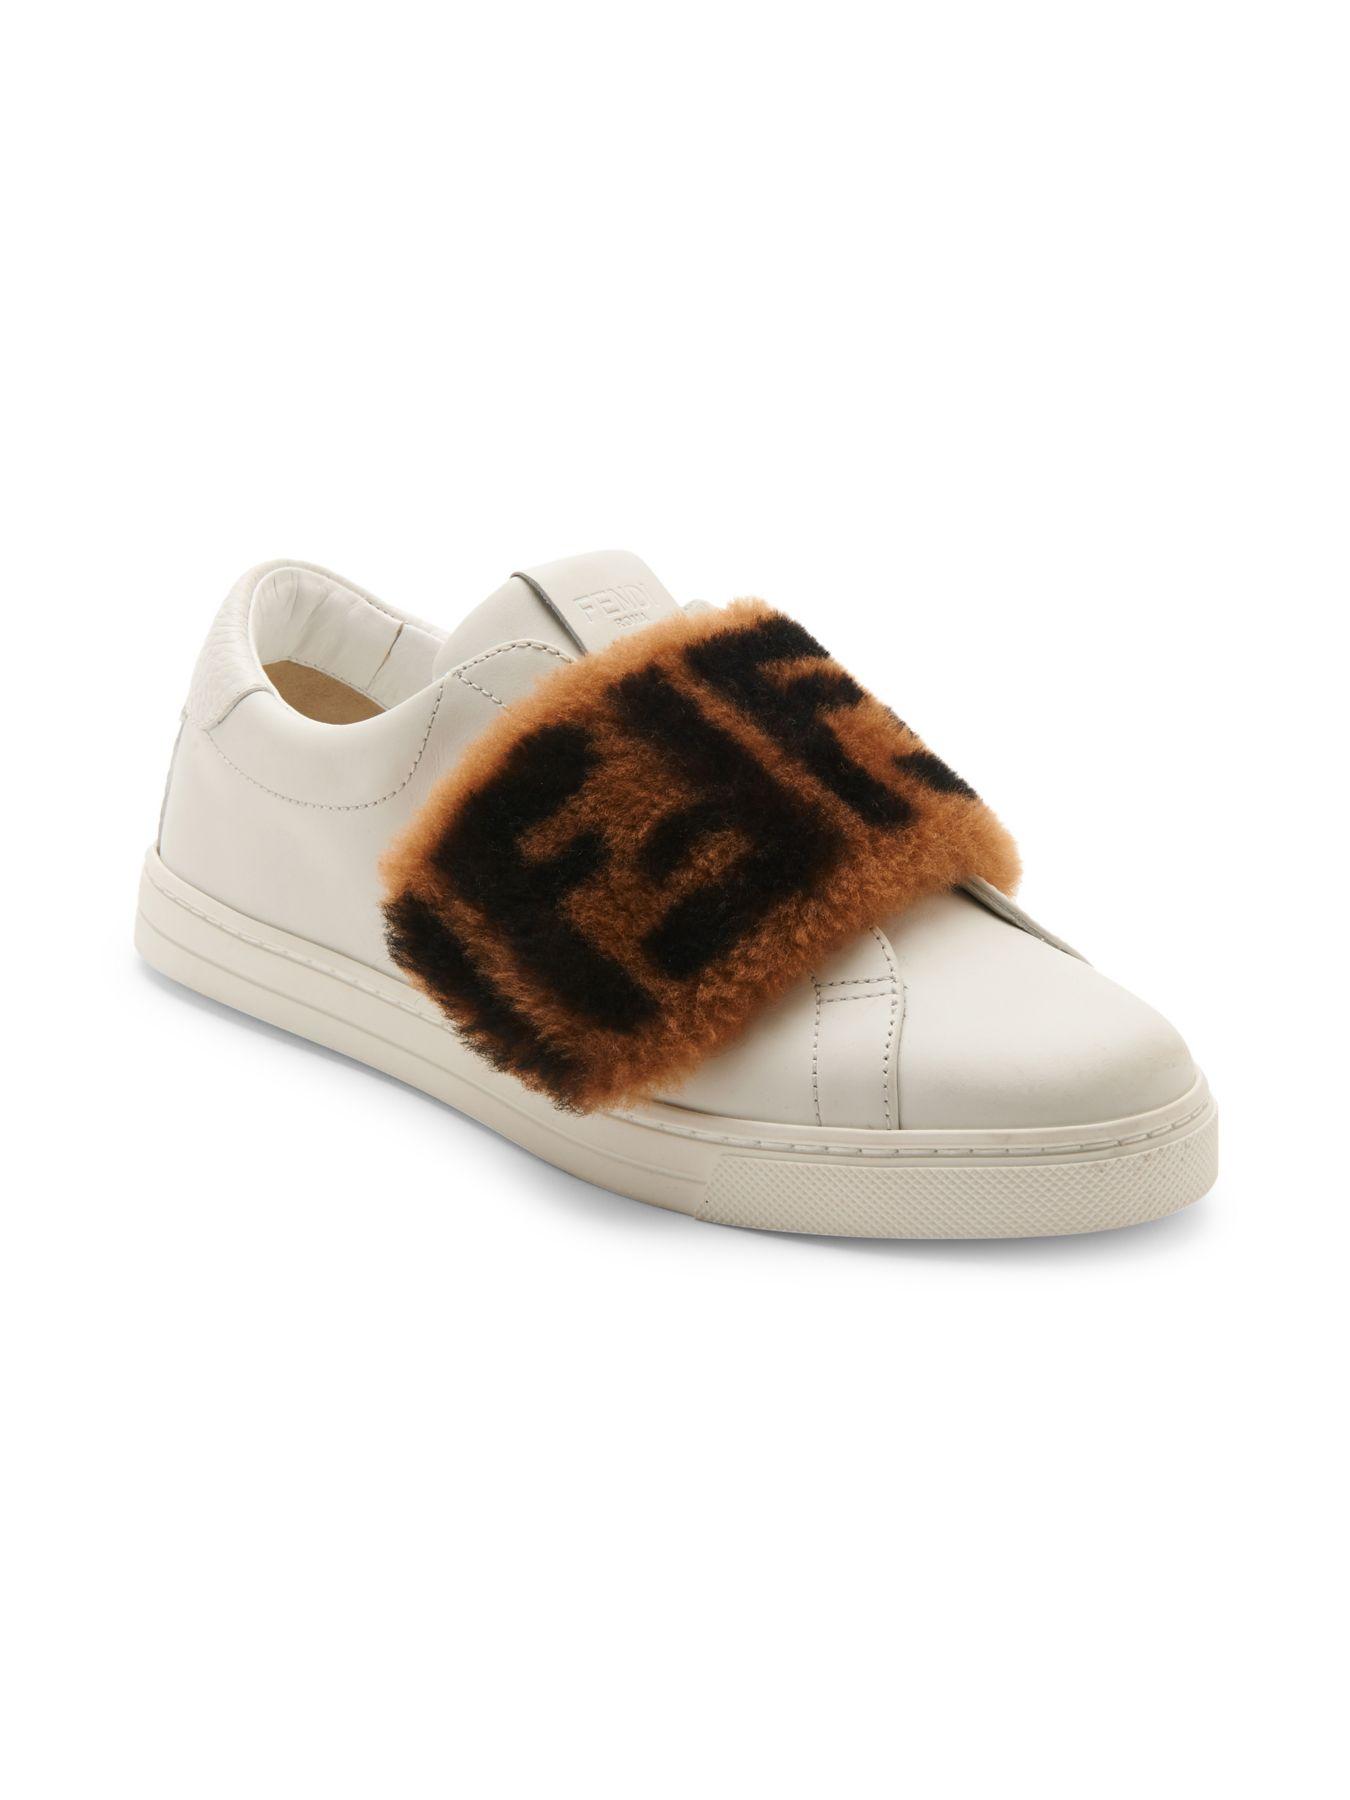 Fendi Shearling-trimmed Leather 